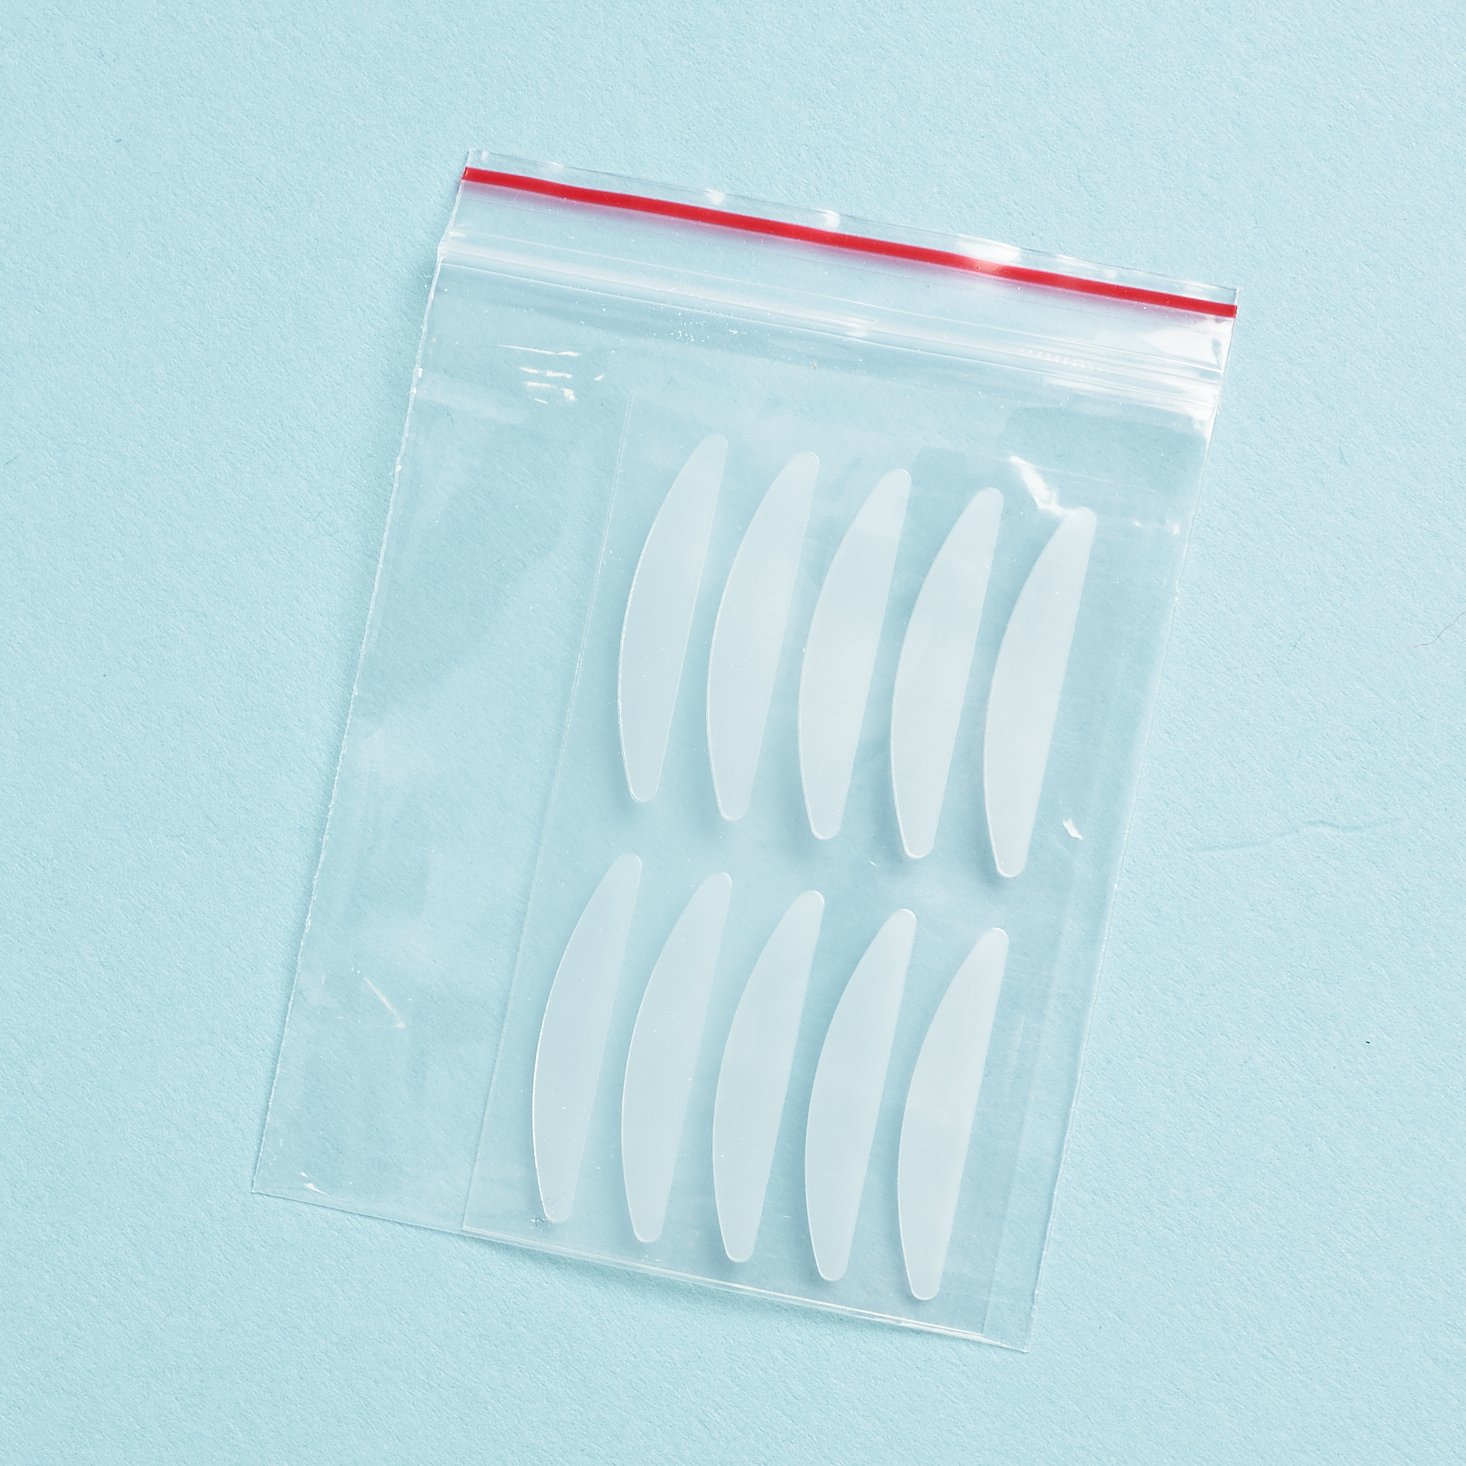 lid strips made of clear silicone